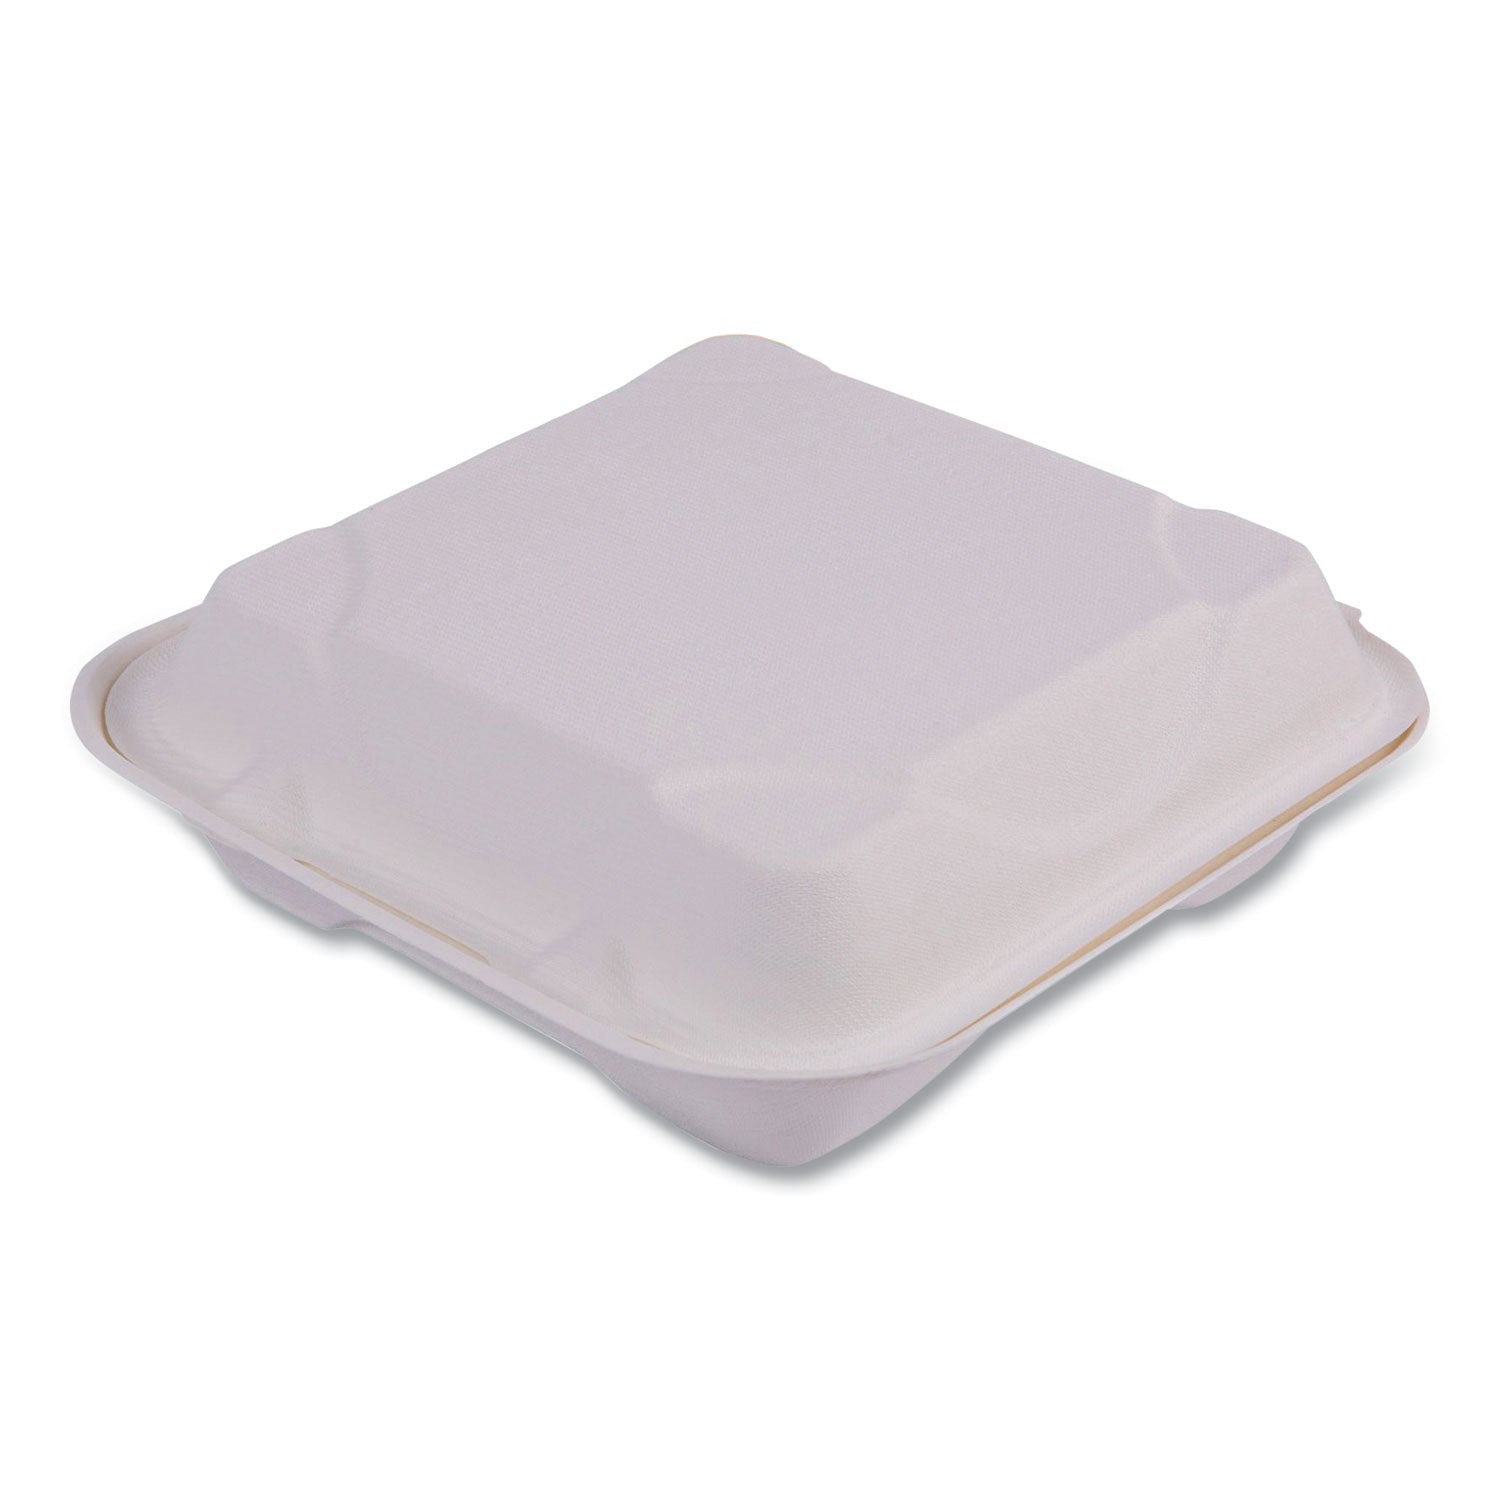 Bagasse Hinged Clamshell Containers, 9 x 9 x 3, White, Sugarcane, 50/Pack, 4 Packs/Carton - 